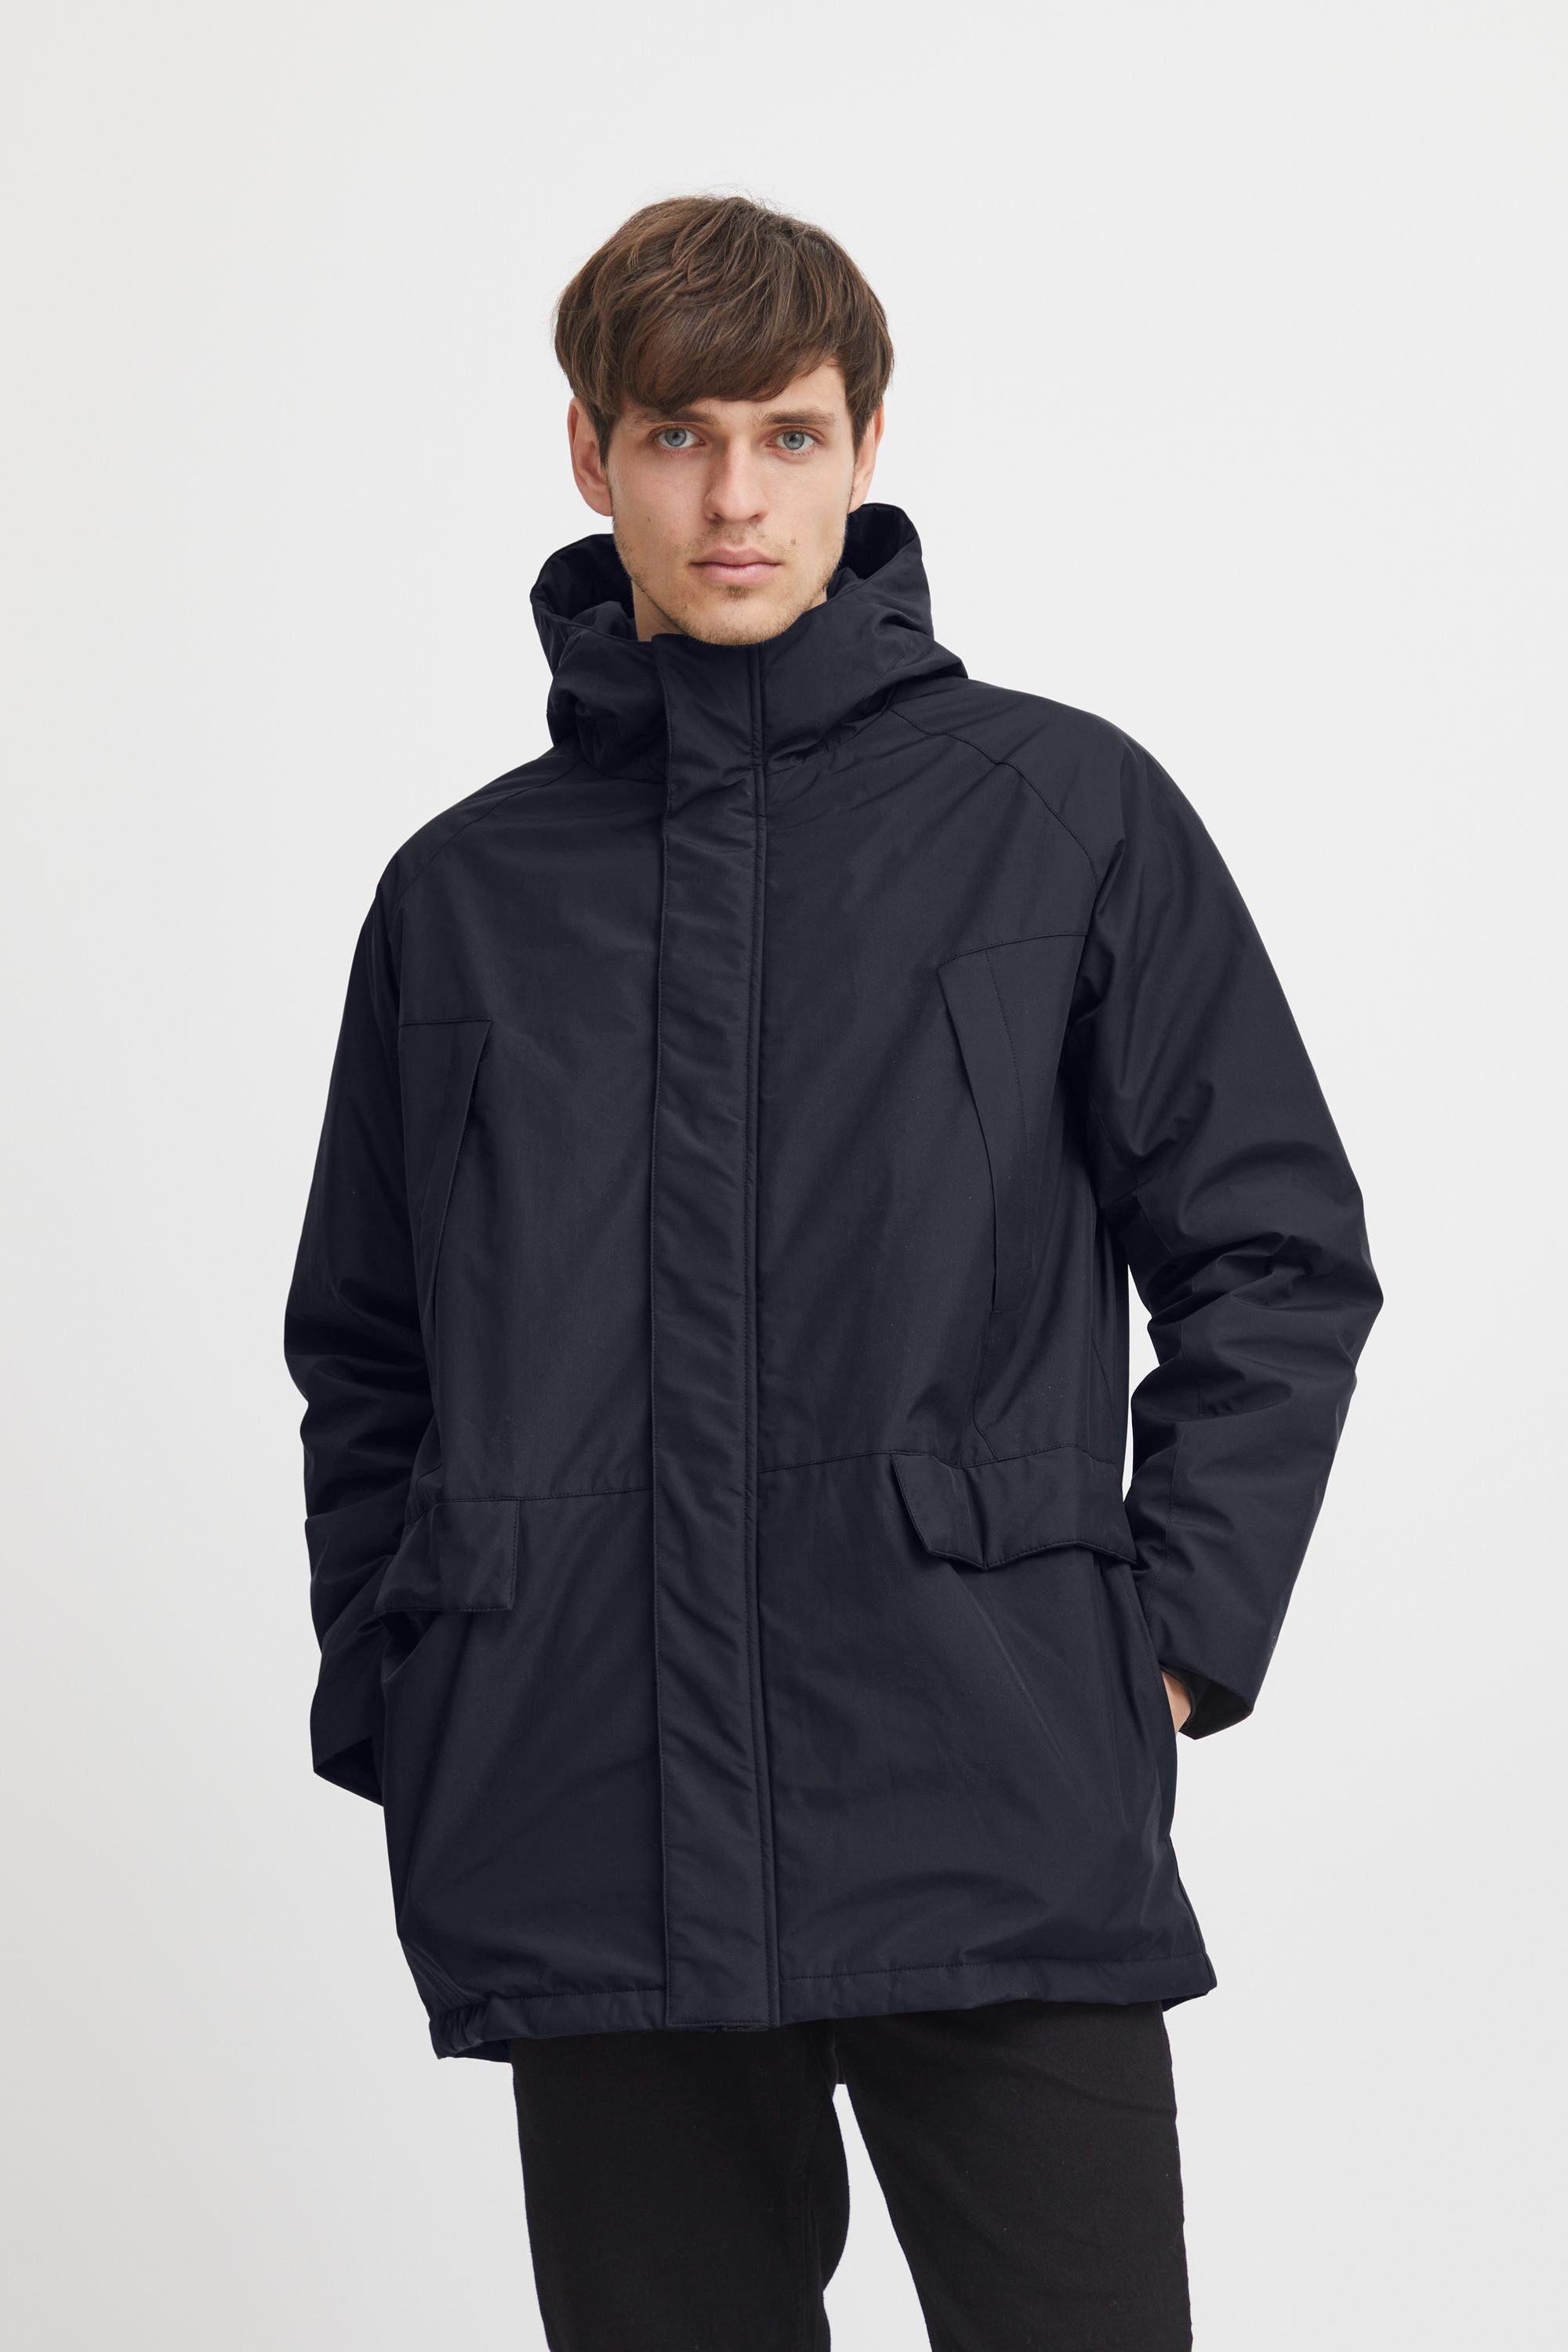 Friday Casual Anthracite (194007) CFOconell - black 20503946 Winterjacke